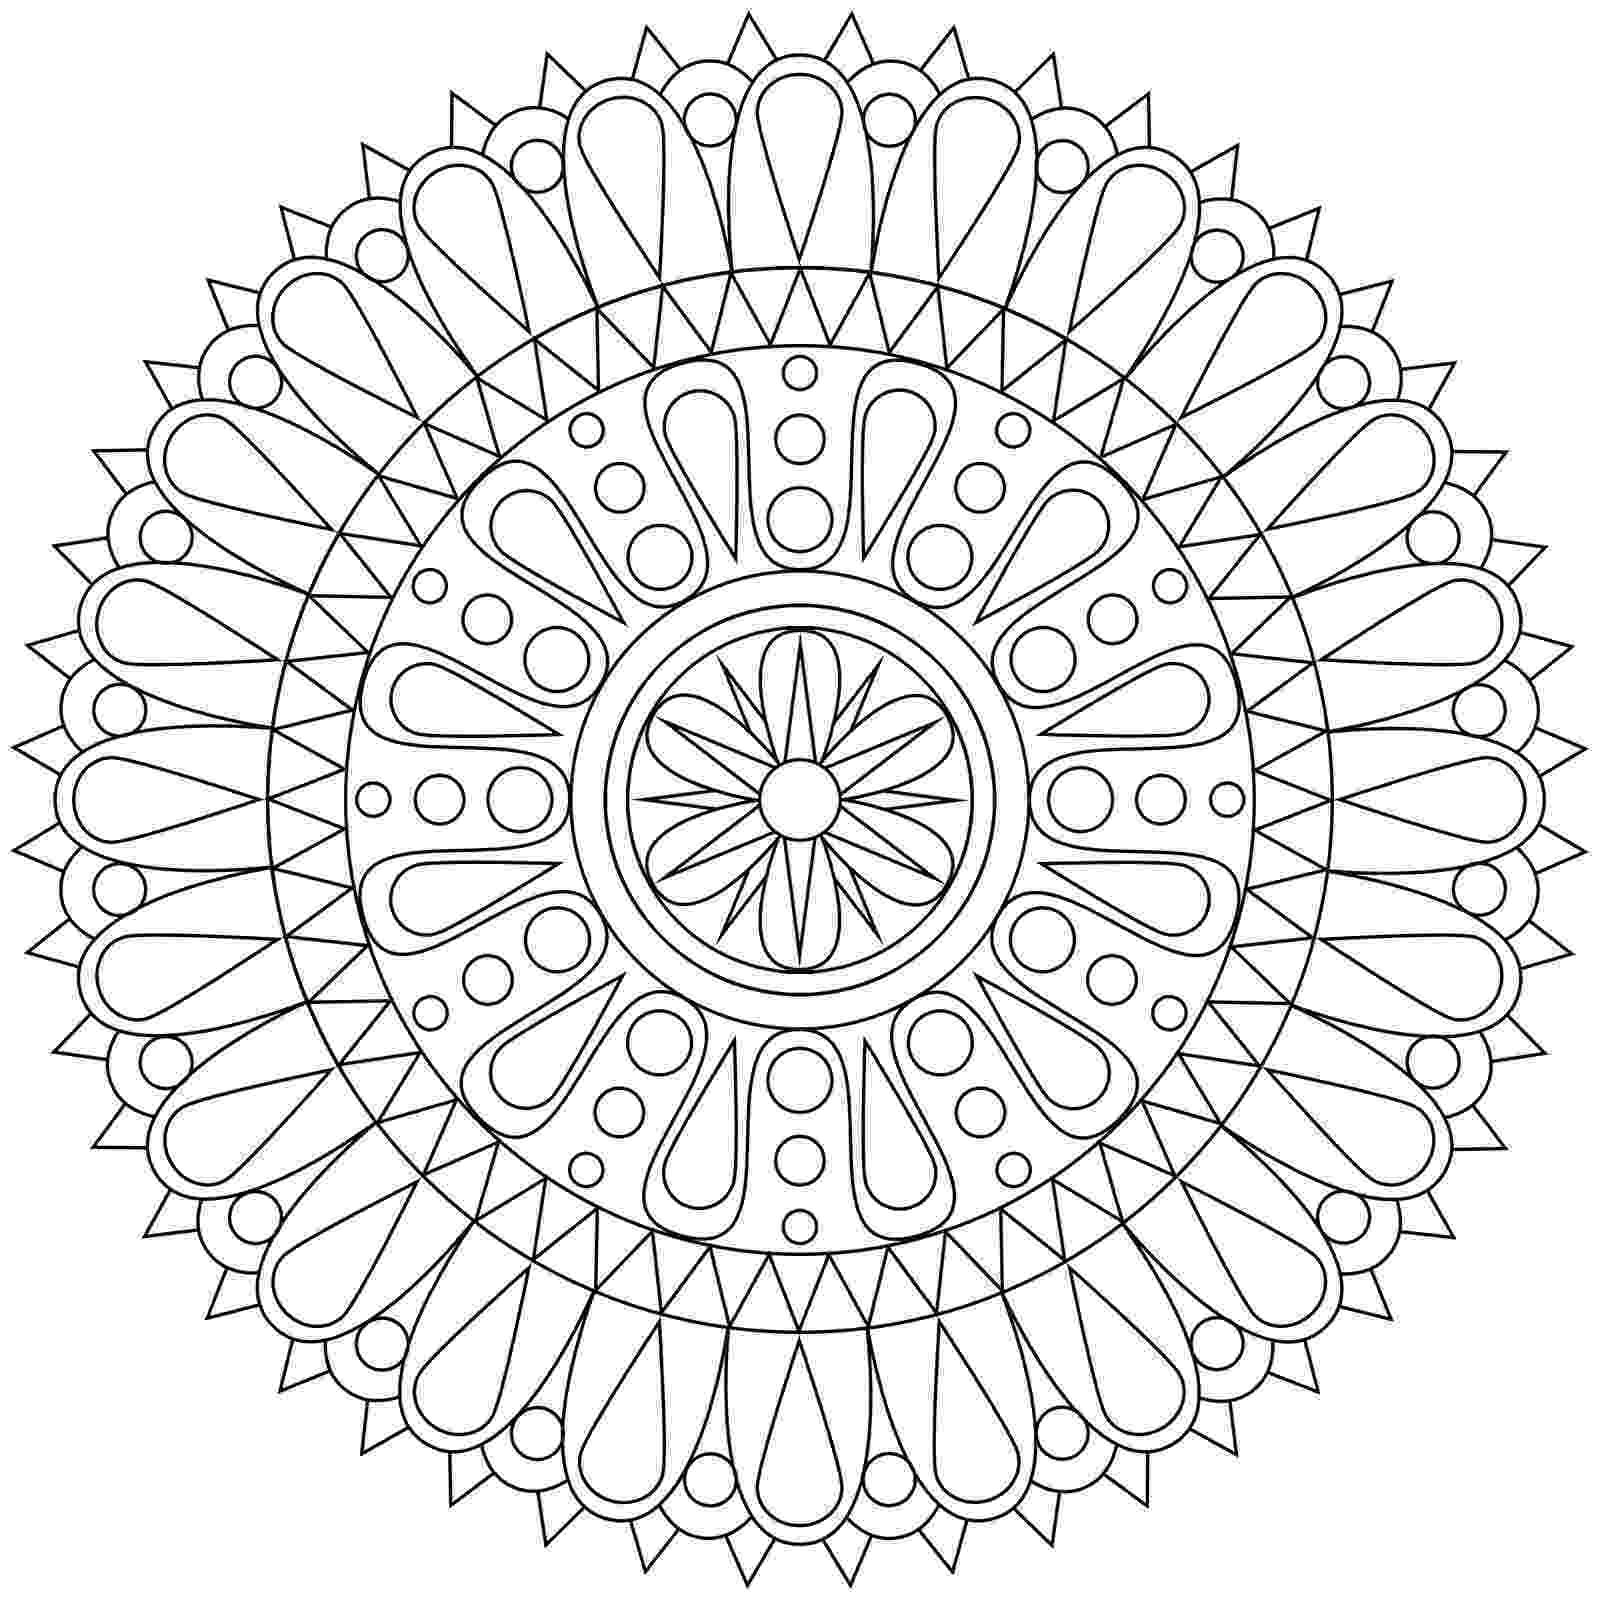 geometric coloring page geometric design coloring pages to download and print for free coloring page geometric 